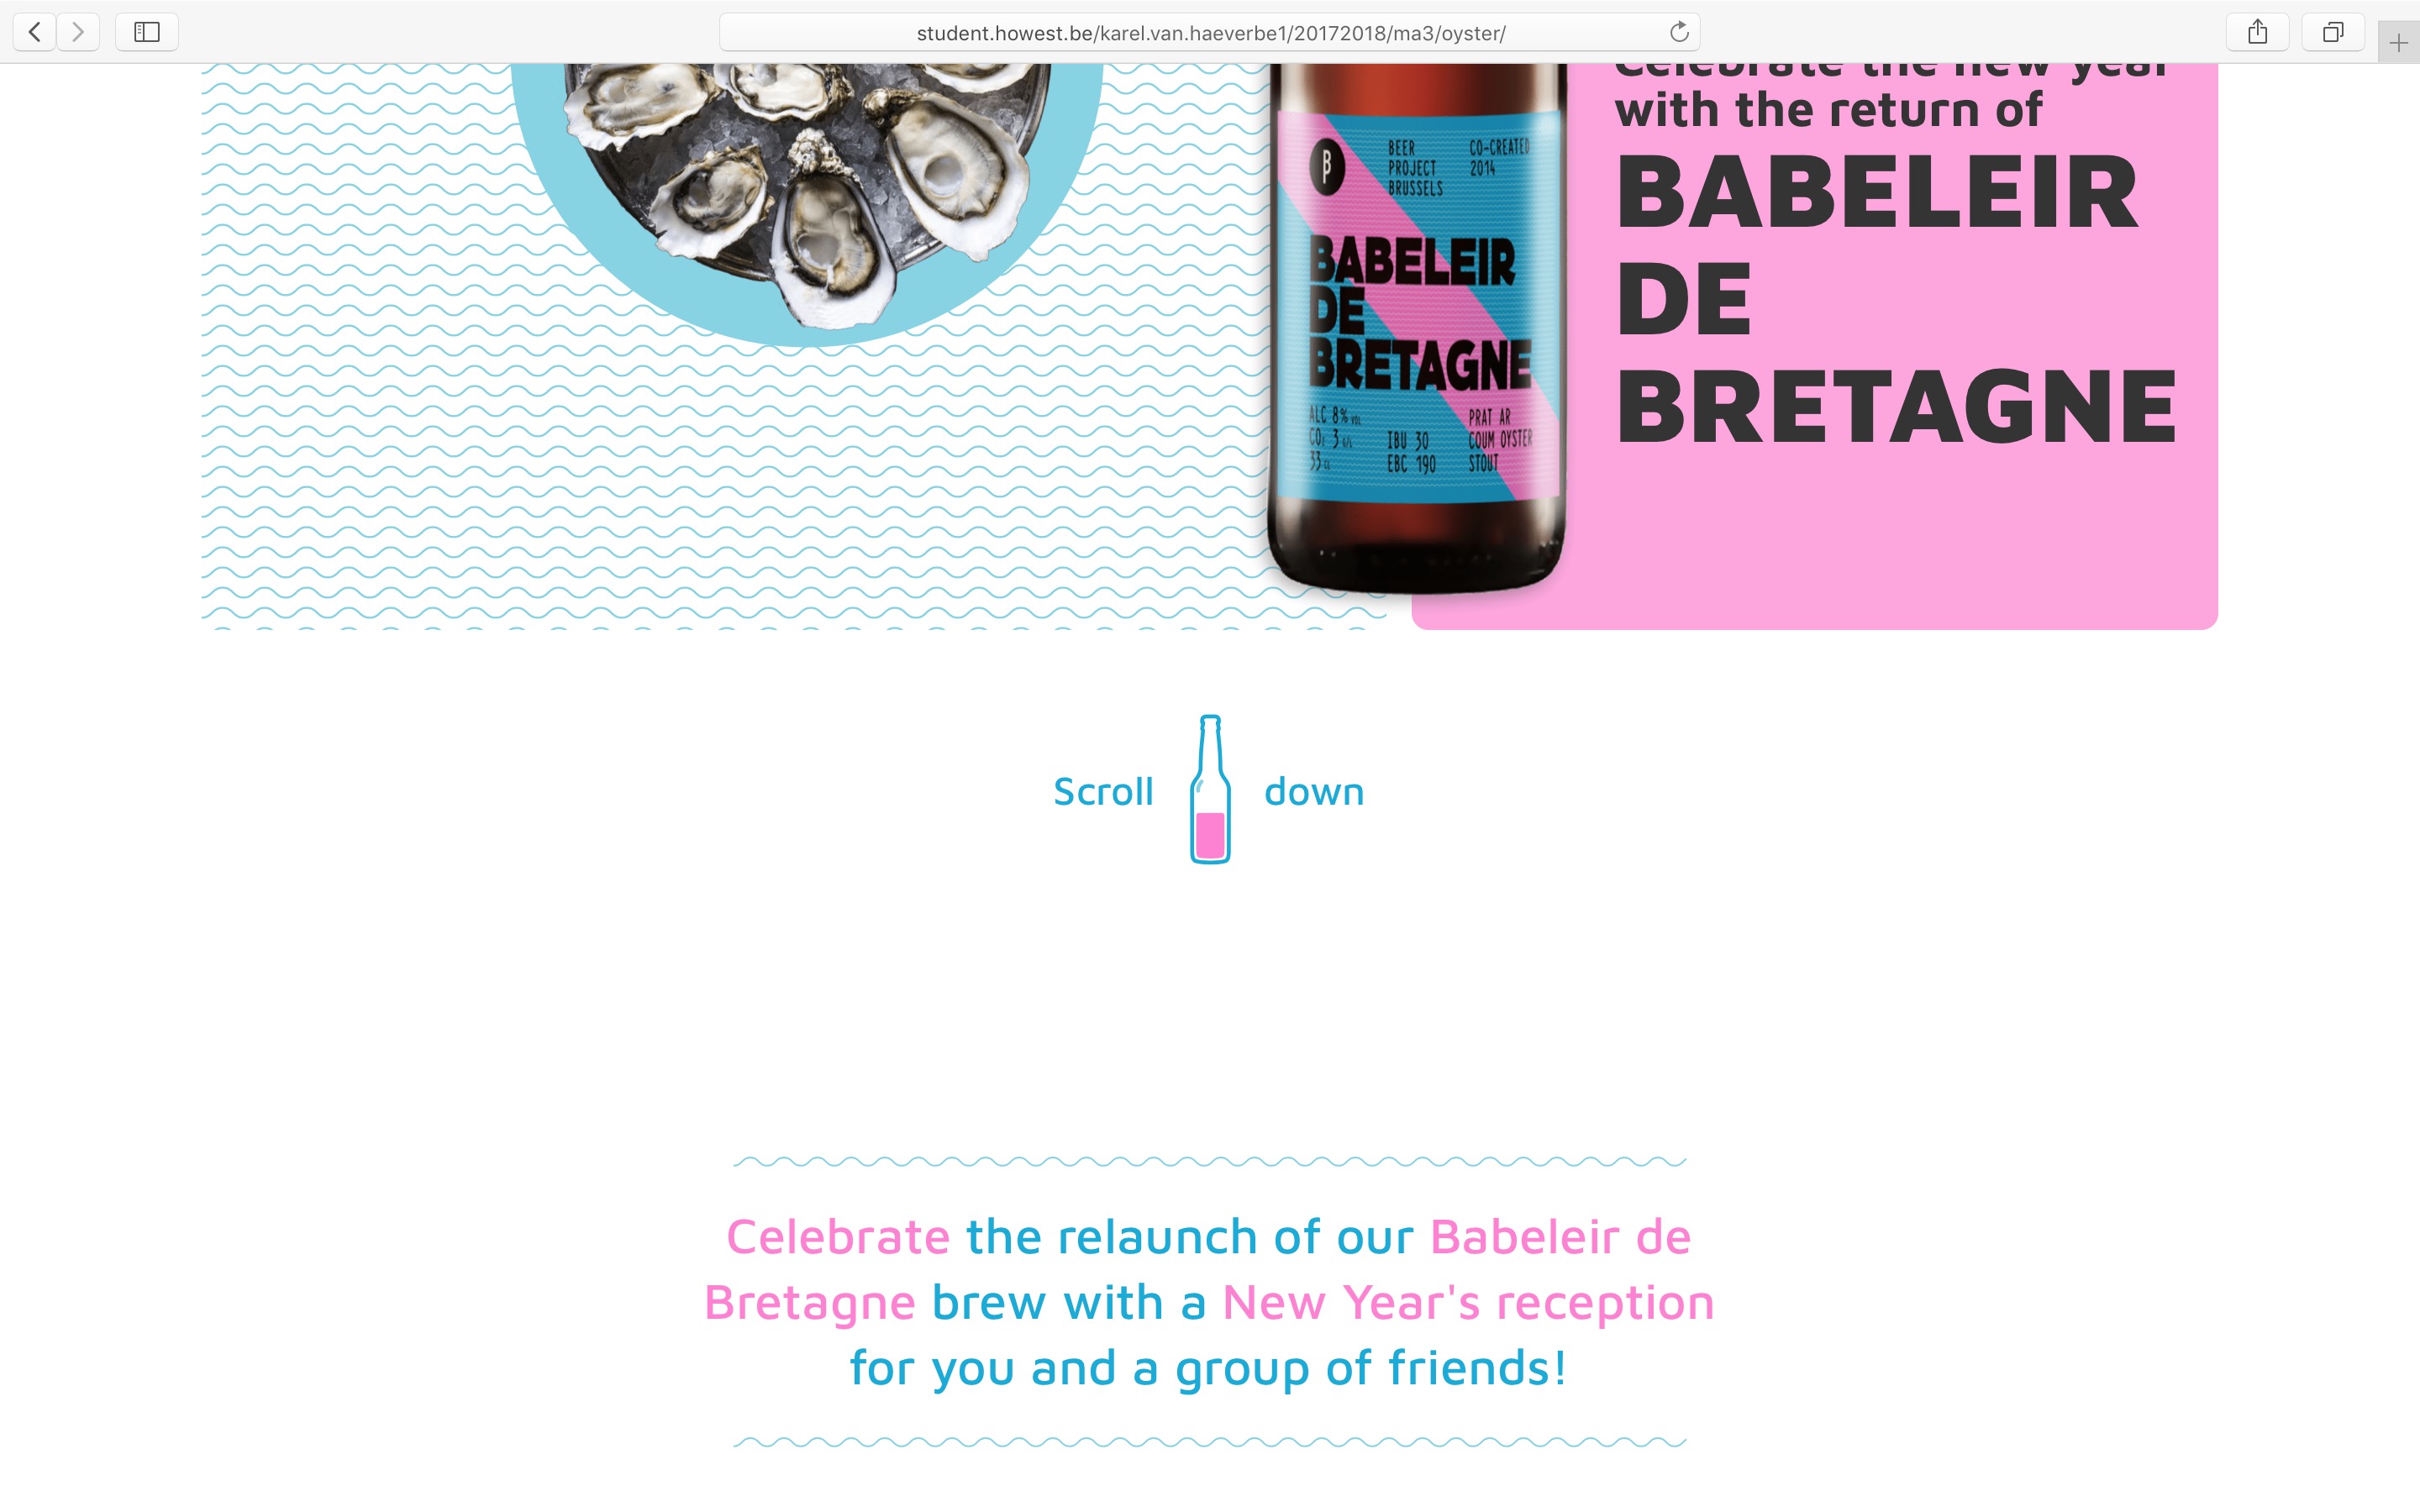 babeleir beer icon image